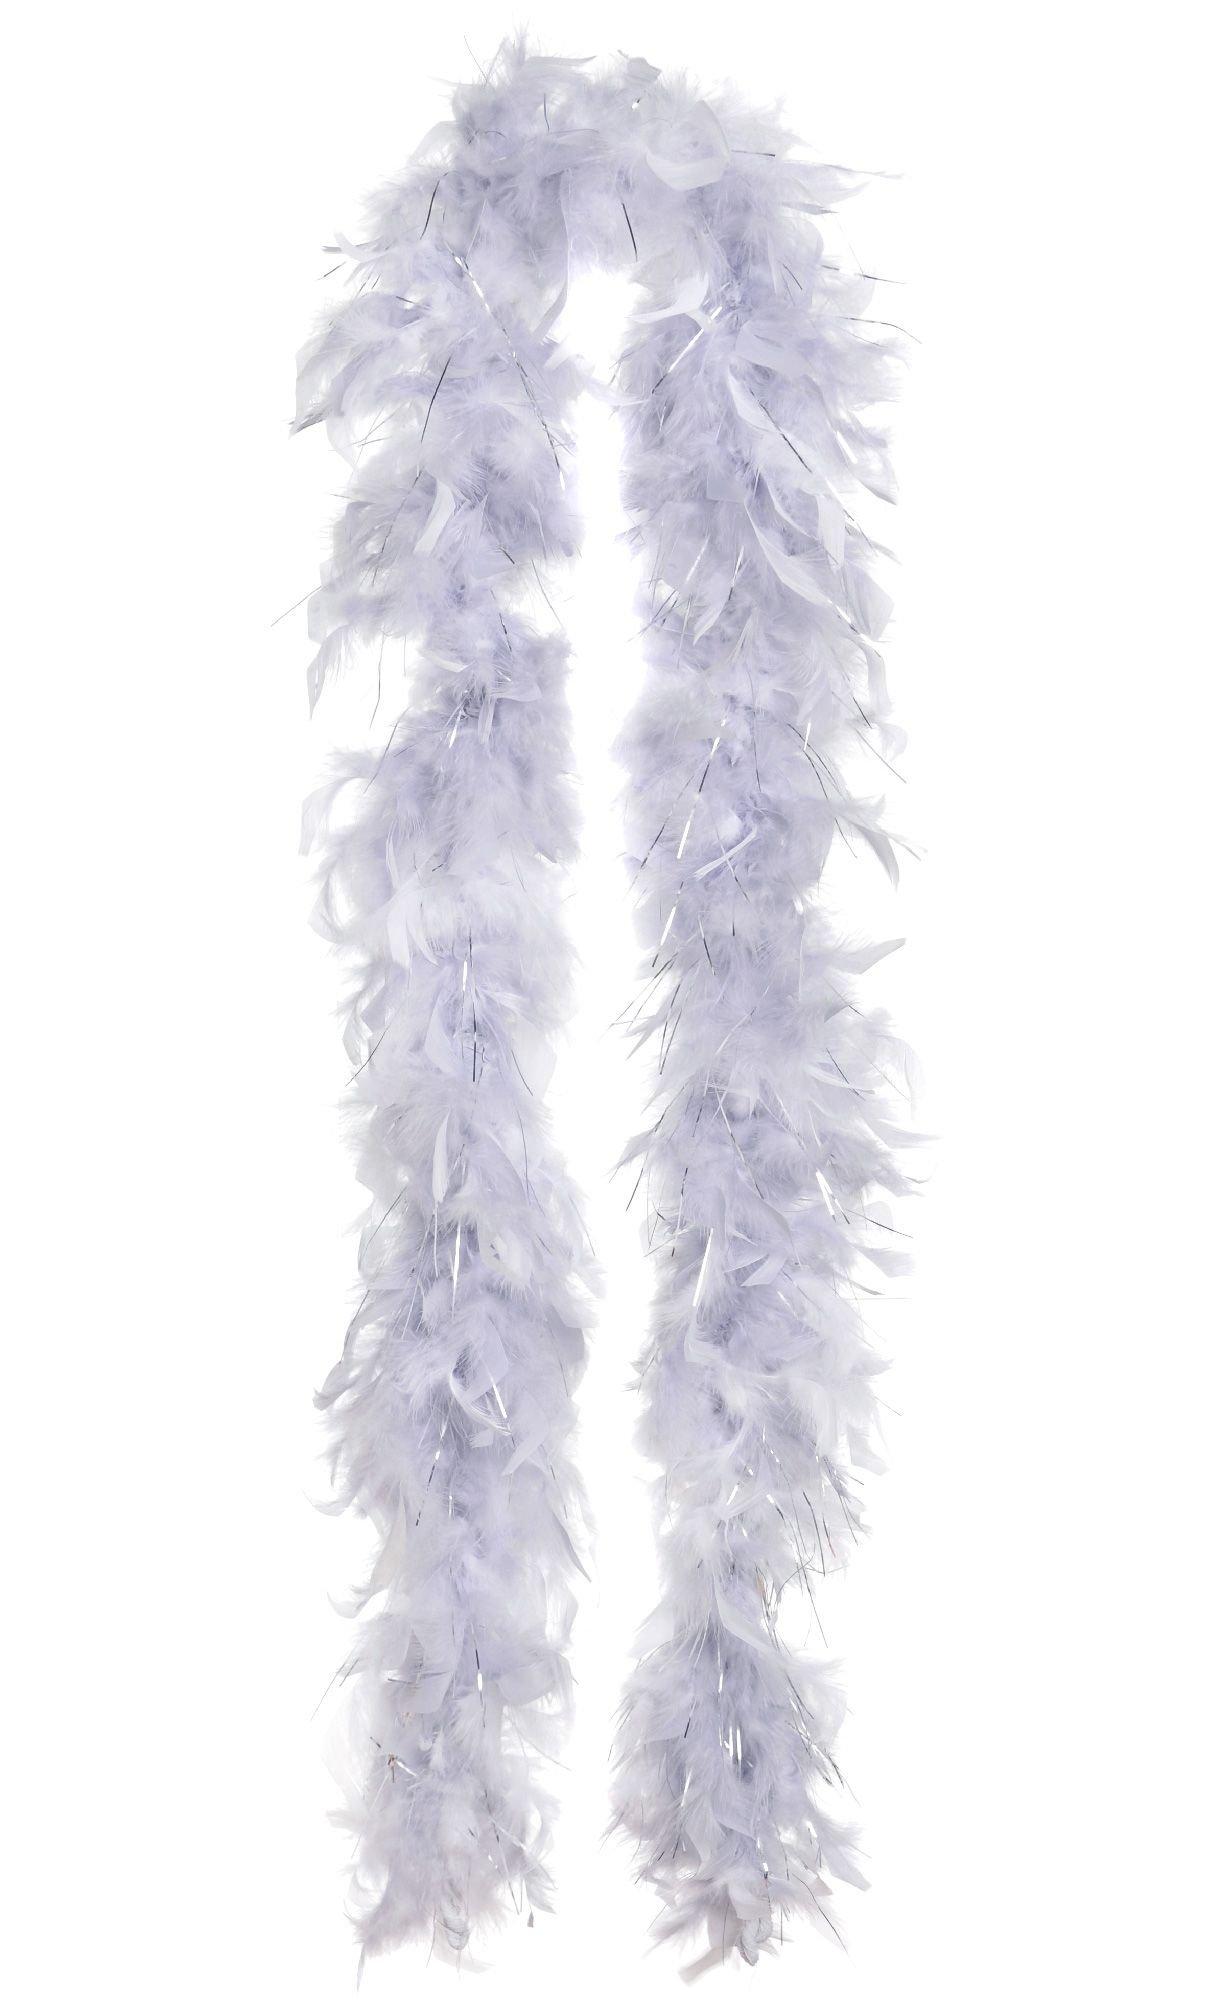  2 Meter Feather Boas Gold Silver with Wire White Feather Scarf  for Crafts Wedding Party Dresses Skirt Decorative Shawl-11g Silver Black,2  Meter : Arts, Crafts & Sewing